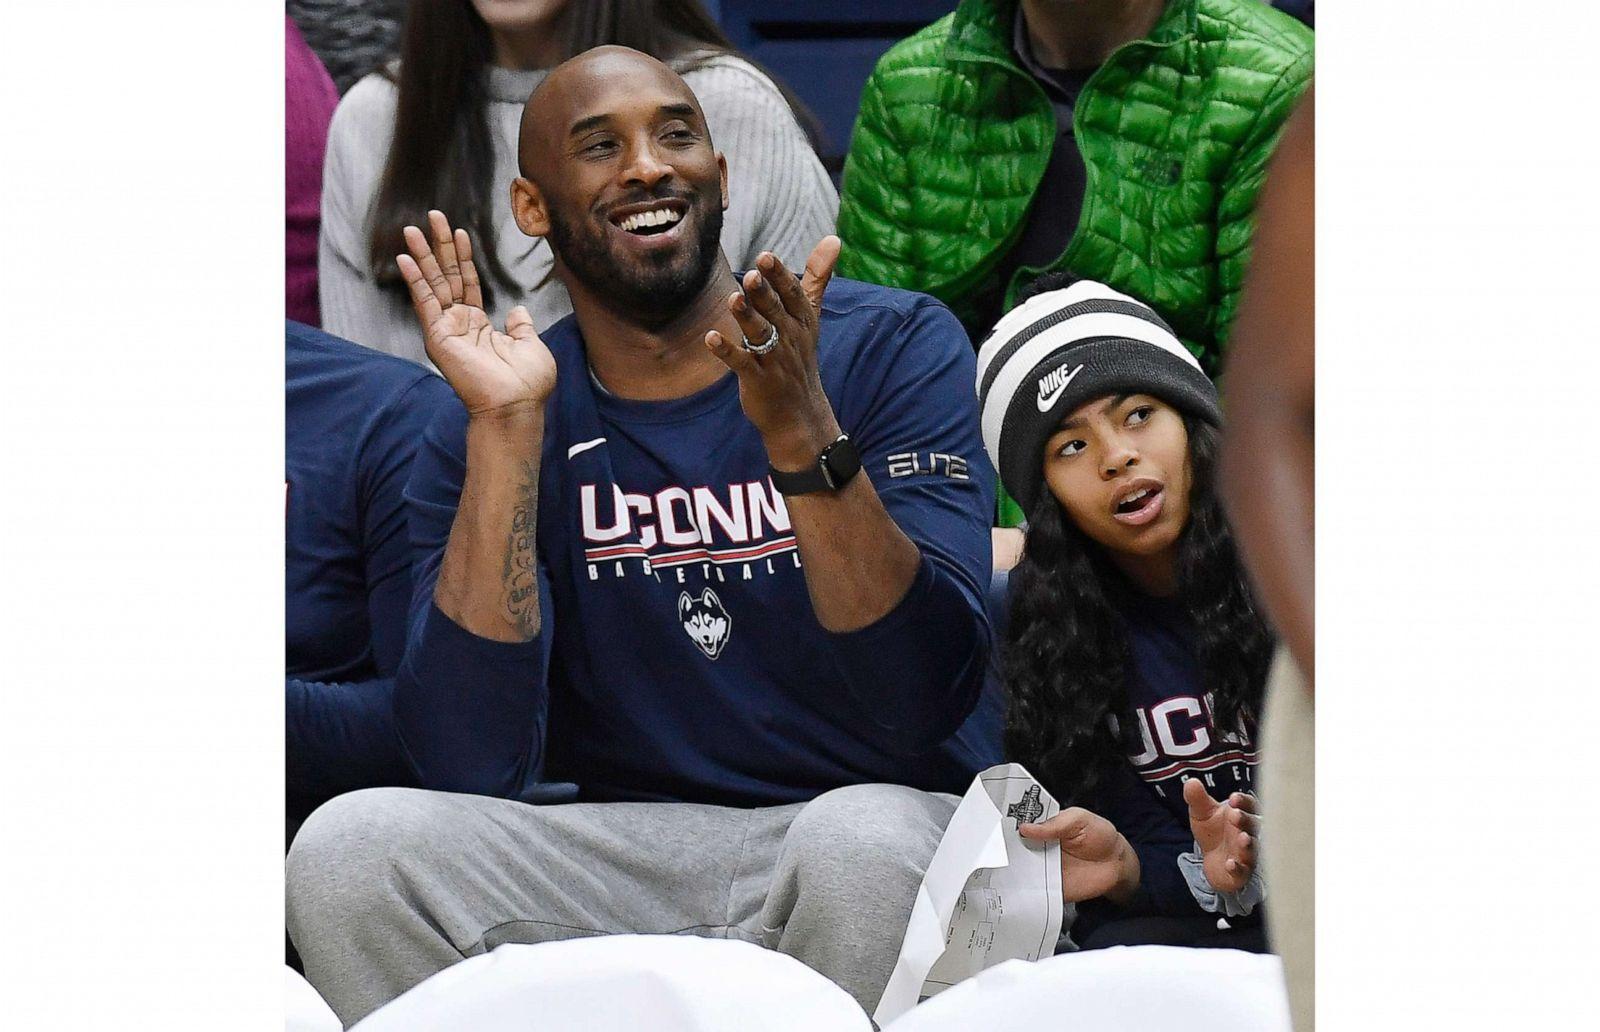 Kobe Bryant's 13 Year Old Daughter, Gianna, Was Following In NBA